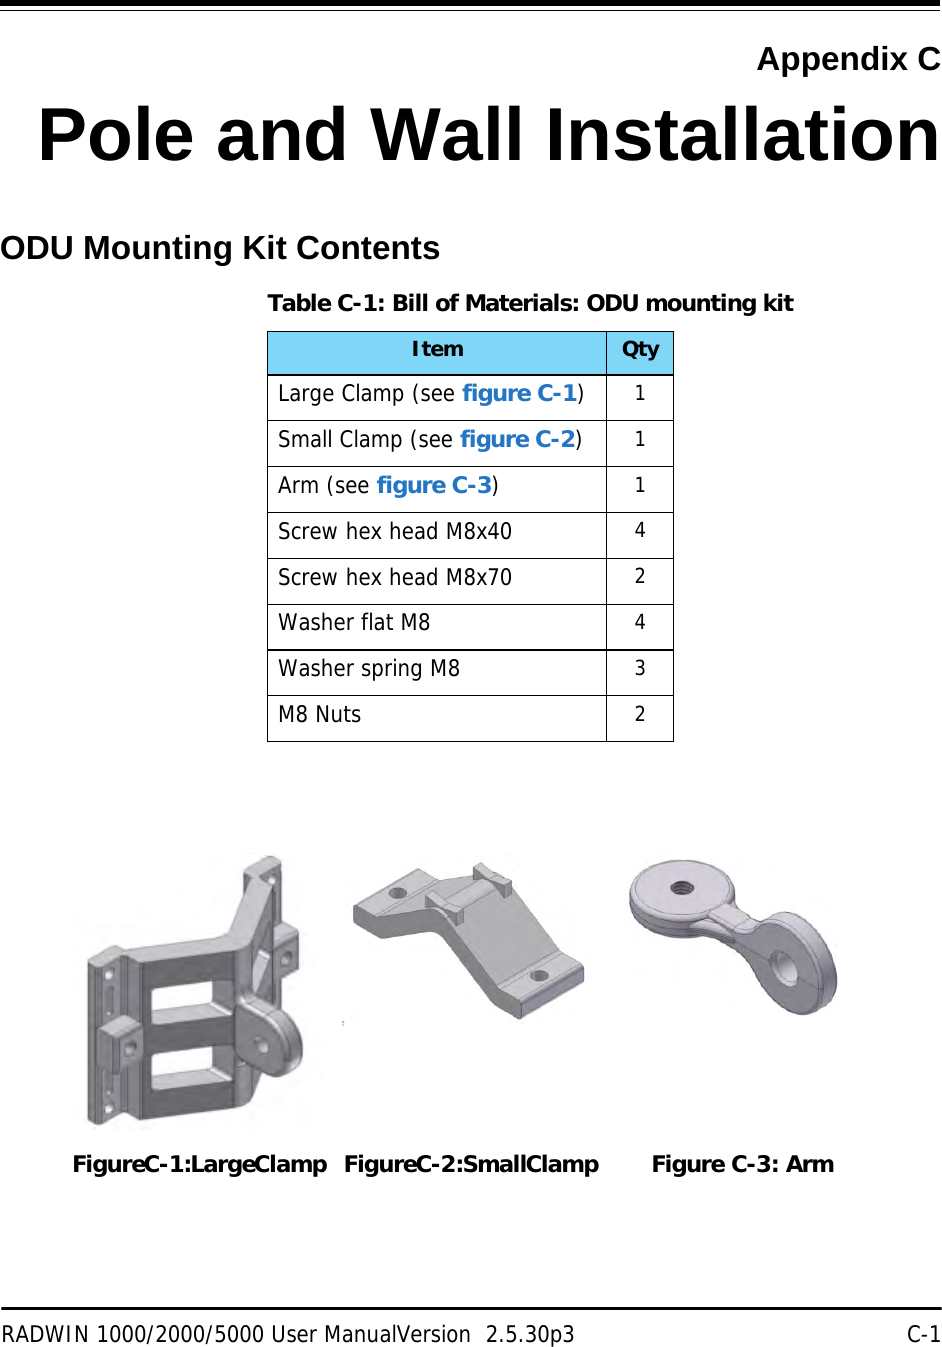 RADWIN 1000/2000/5000 User ManualVersion  2.5.30p3 C-1Appendix CPole and Wall InstallationODU Mounting Kit ContentsTable C-1: Bill of Materials: ODU mounting kitItem QtyLarge Clamp (see figure C-1)1Small Clamp (see figure C-2)1Arm (see figure C-3)1Screw hex head M8x40 4Screw hex head M8x70 2Washer flat M8 4Washer spring M8 3M8 Nuts 2Figure C-1: Large Clamp Figure C-2: Small Clamp Figure C-3: Arm